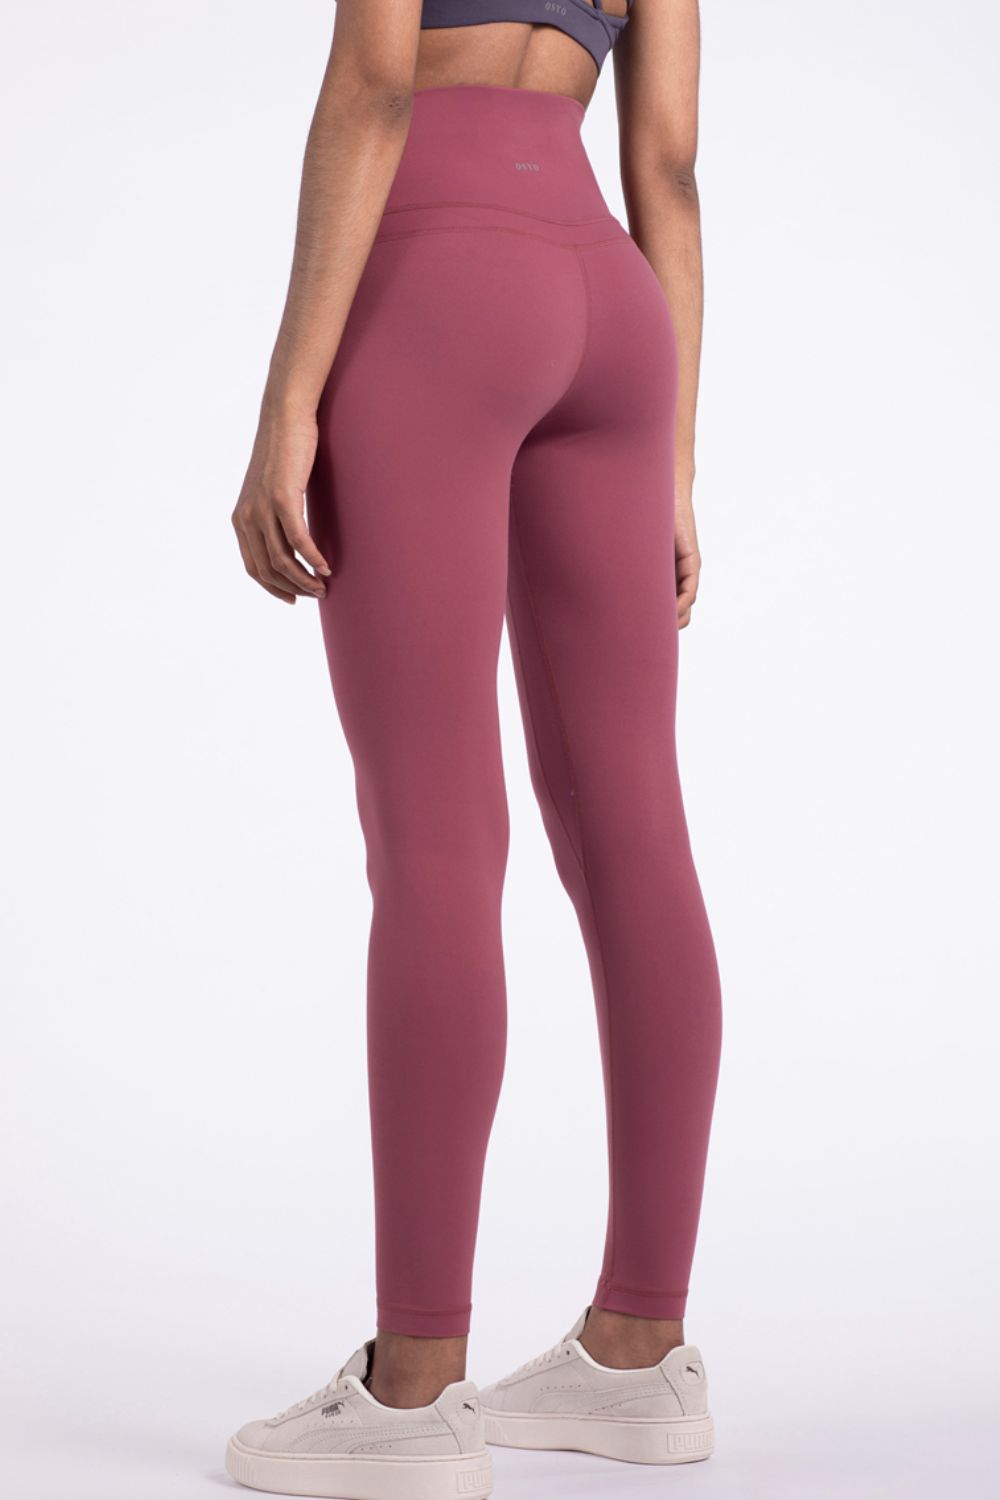 You are Worth The Chase Yoga Leggings - DromedarShop.com Online Boutique